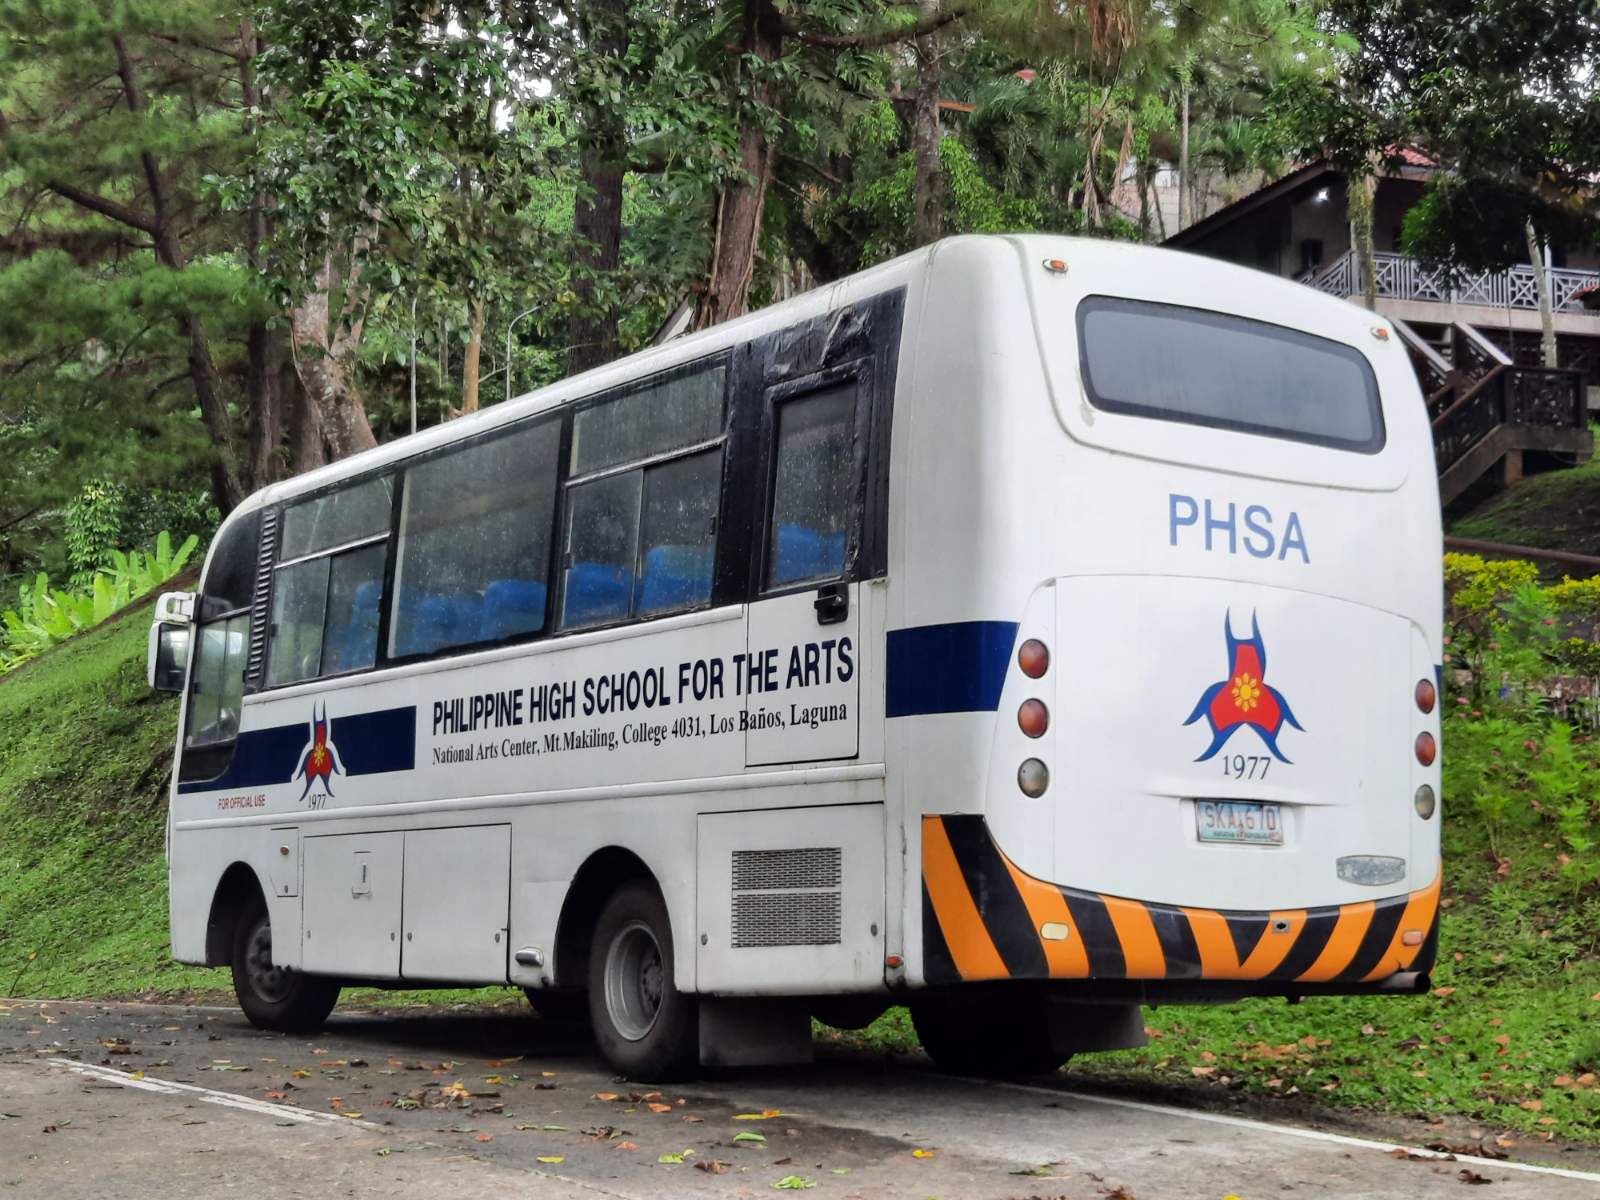 Buses like this take the students around the sprawling PHSA campus on Mt. Makiling in Los Baños city, Laguna province. Photo: JC Gotinga